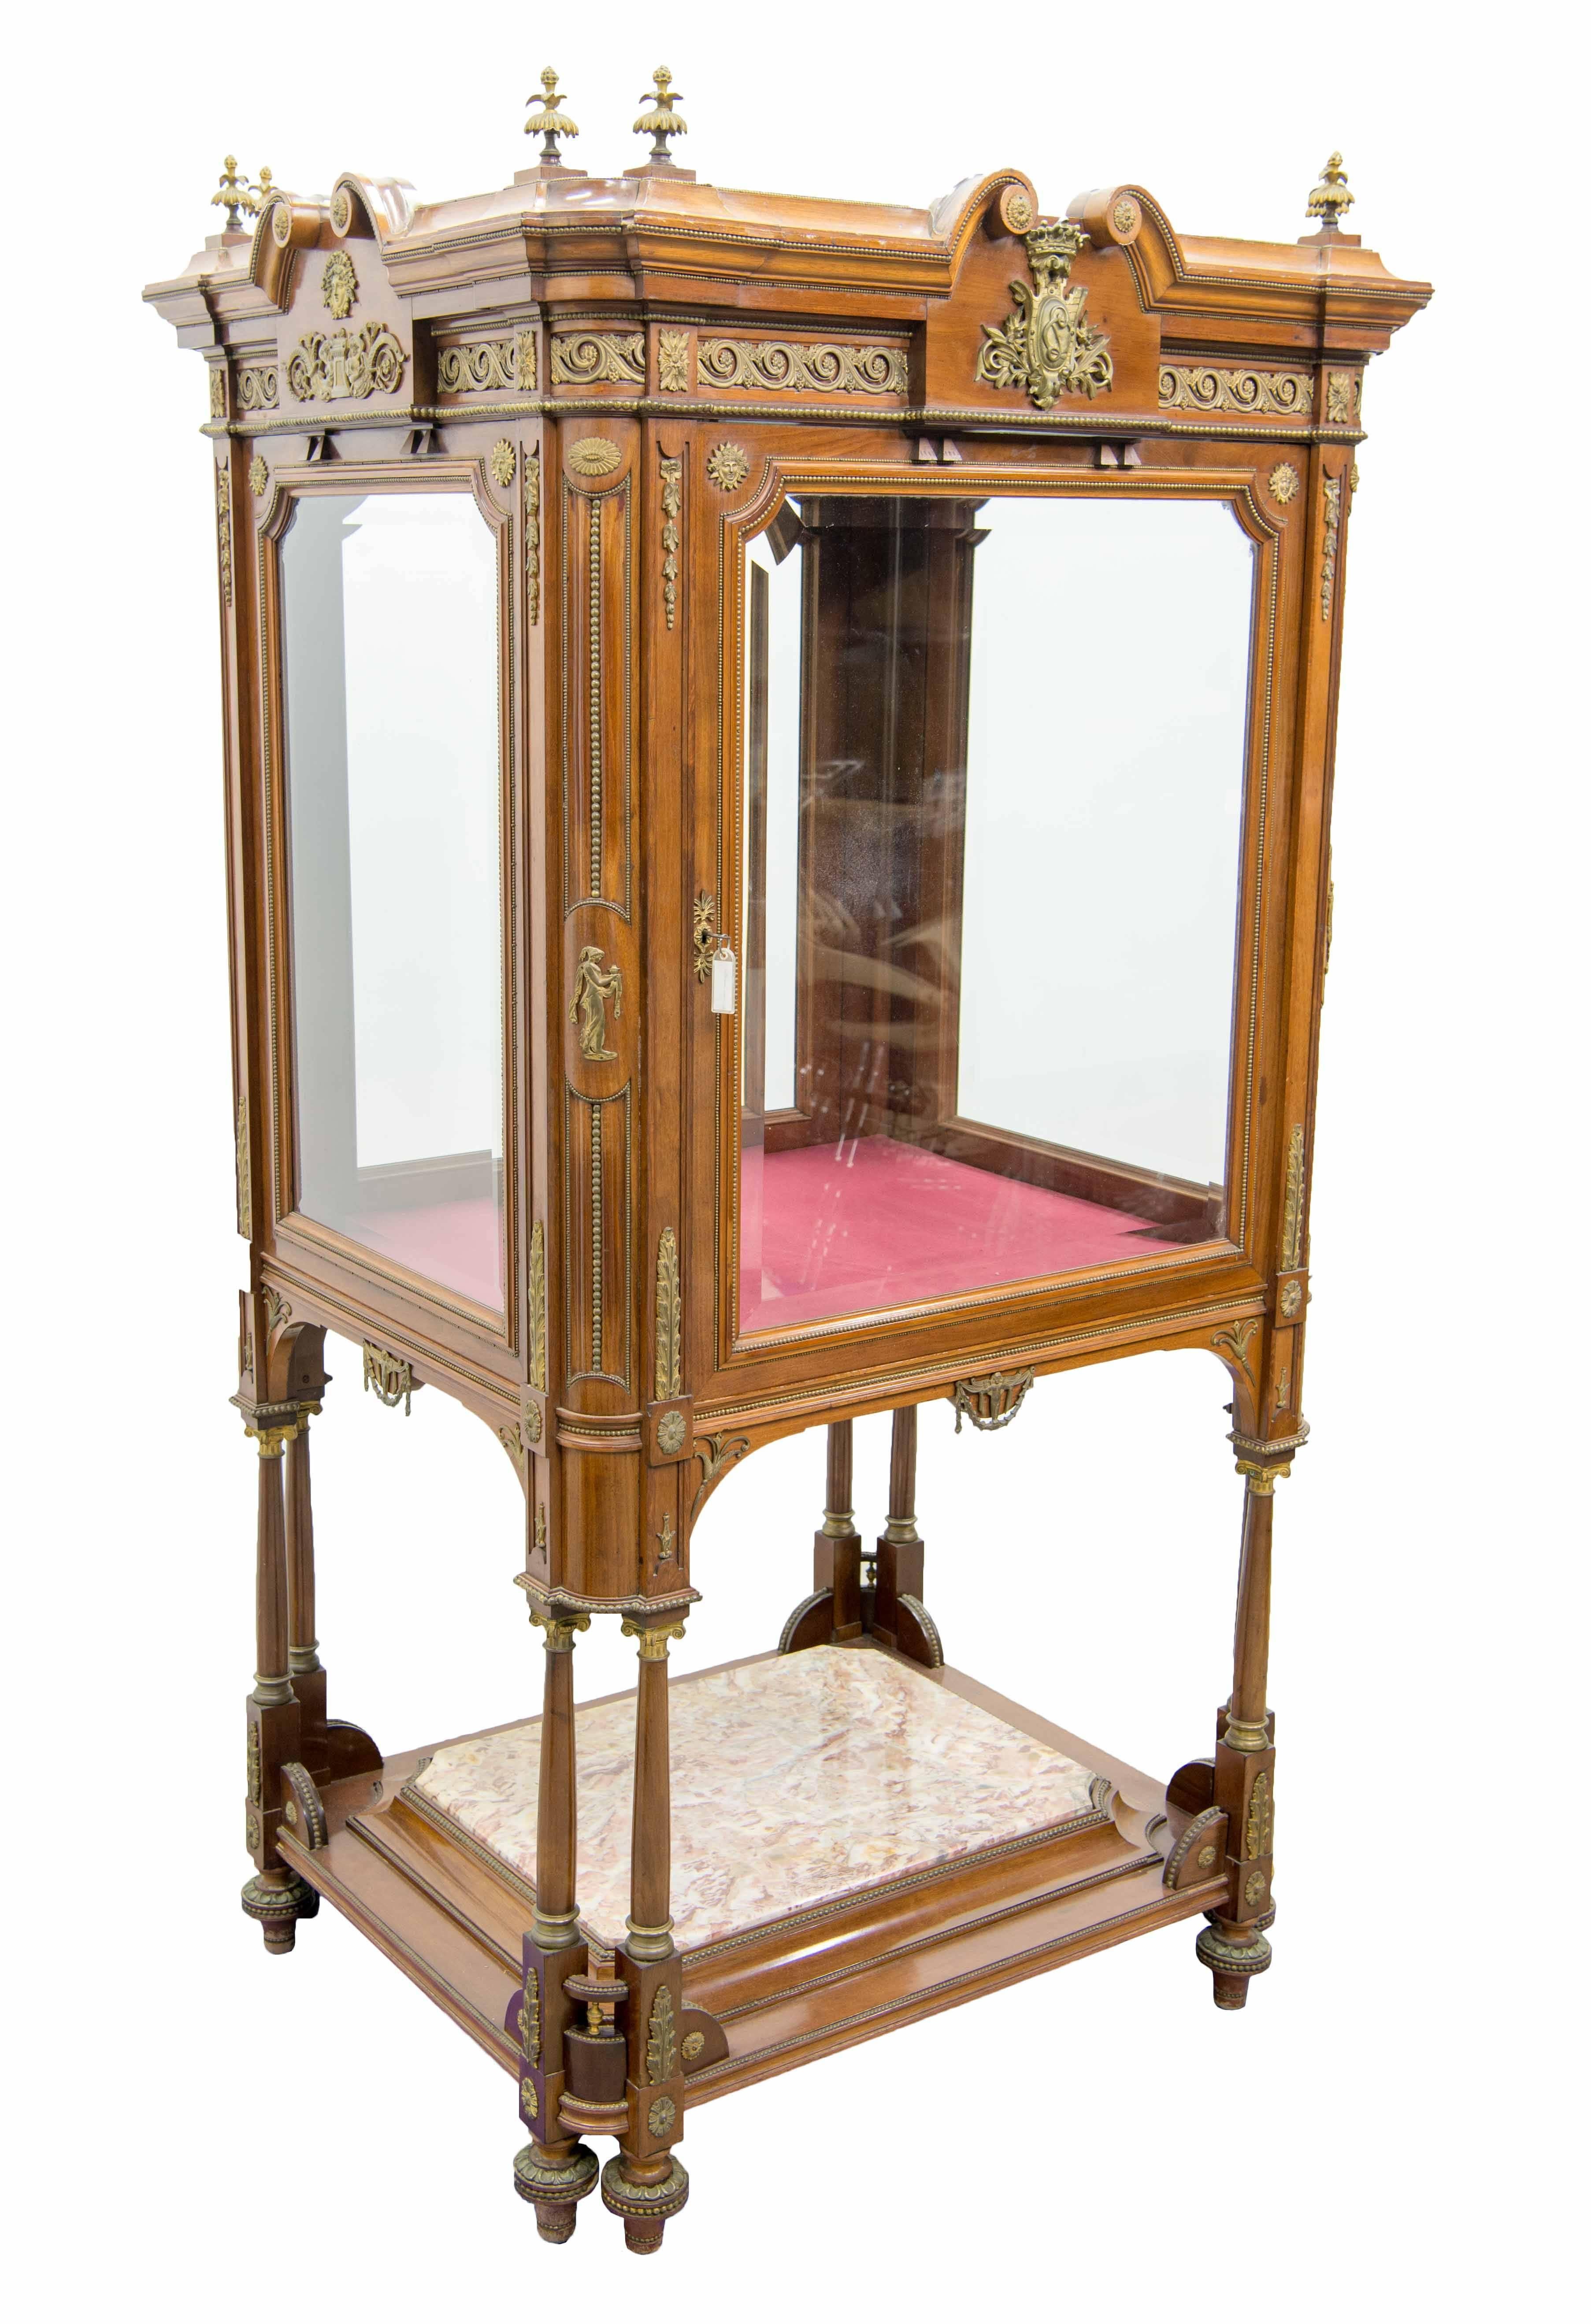 We have this spectacular display cabinet or showcase with glass on all sides for displaying special items. The cabinet is entirely made of walnut with bronze-mounted elements. It is made in Empire style and dating to circa 1850, just after the